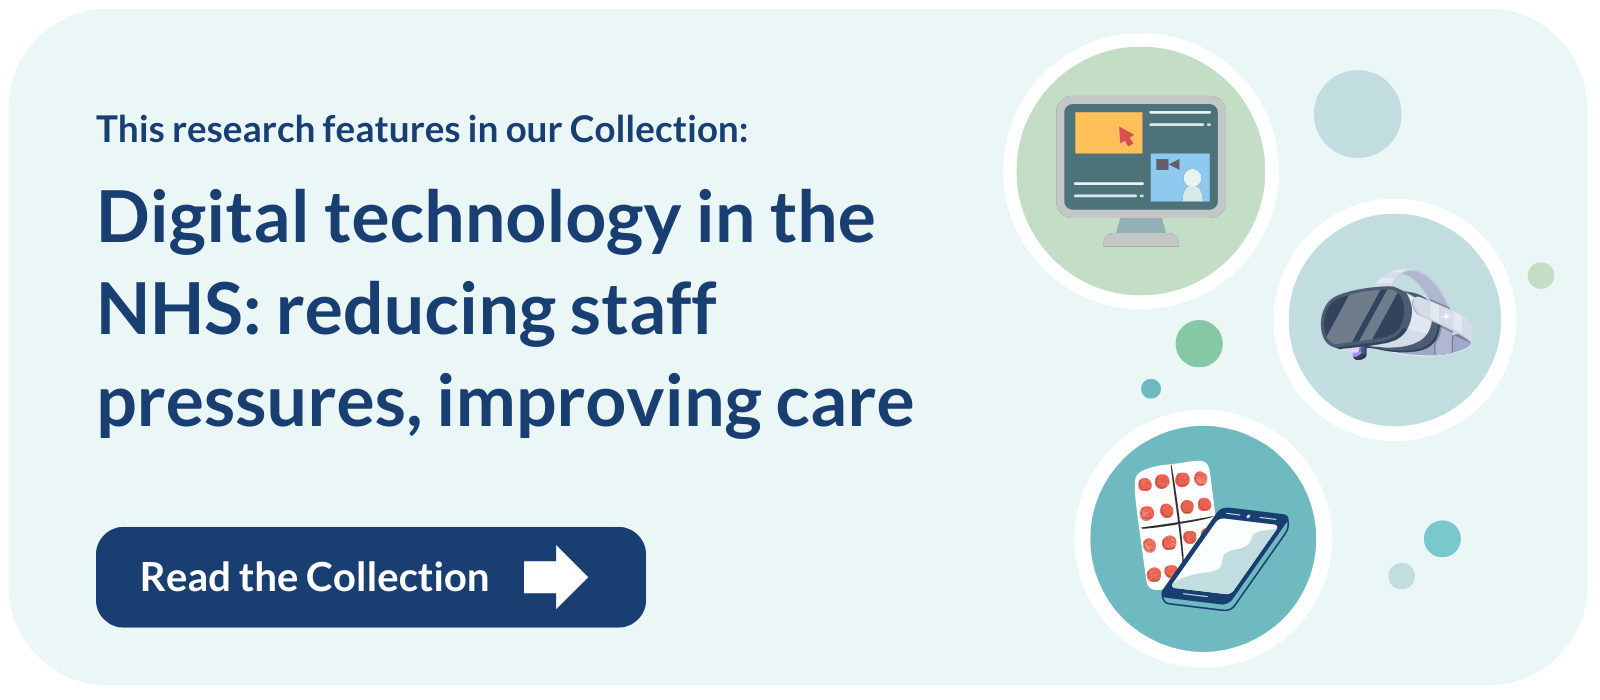 This research features in our Collection: Digital technology in the NHS: reducing staff pressures, improving care. Read the Collection